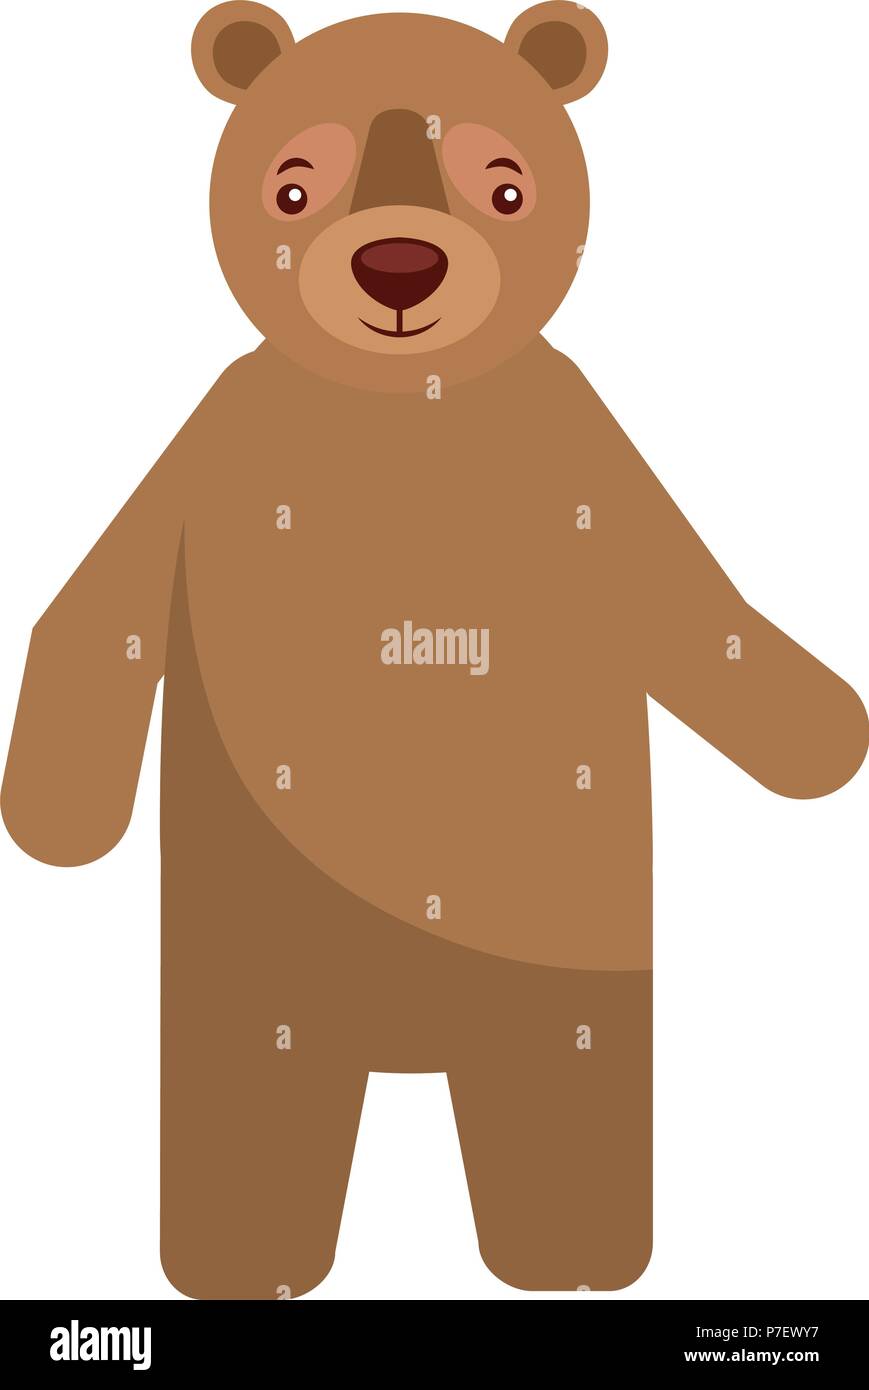 brown grizzly bear standing animal vector illustration Stock Vector